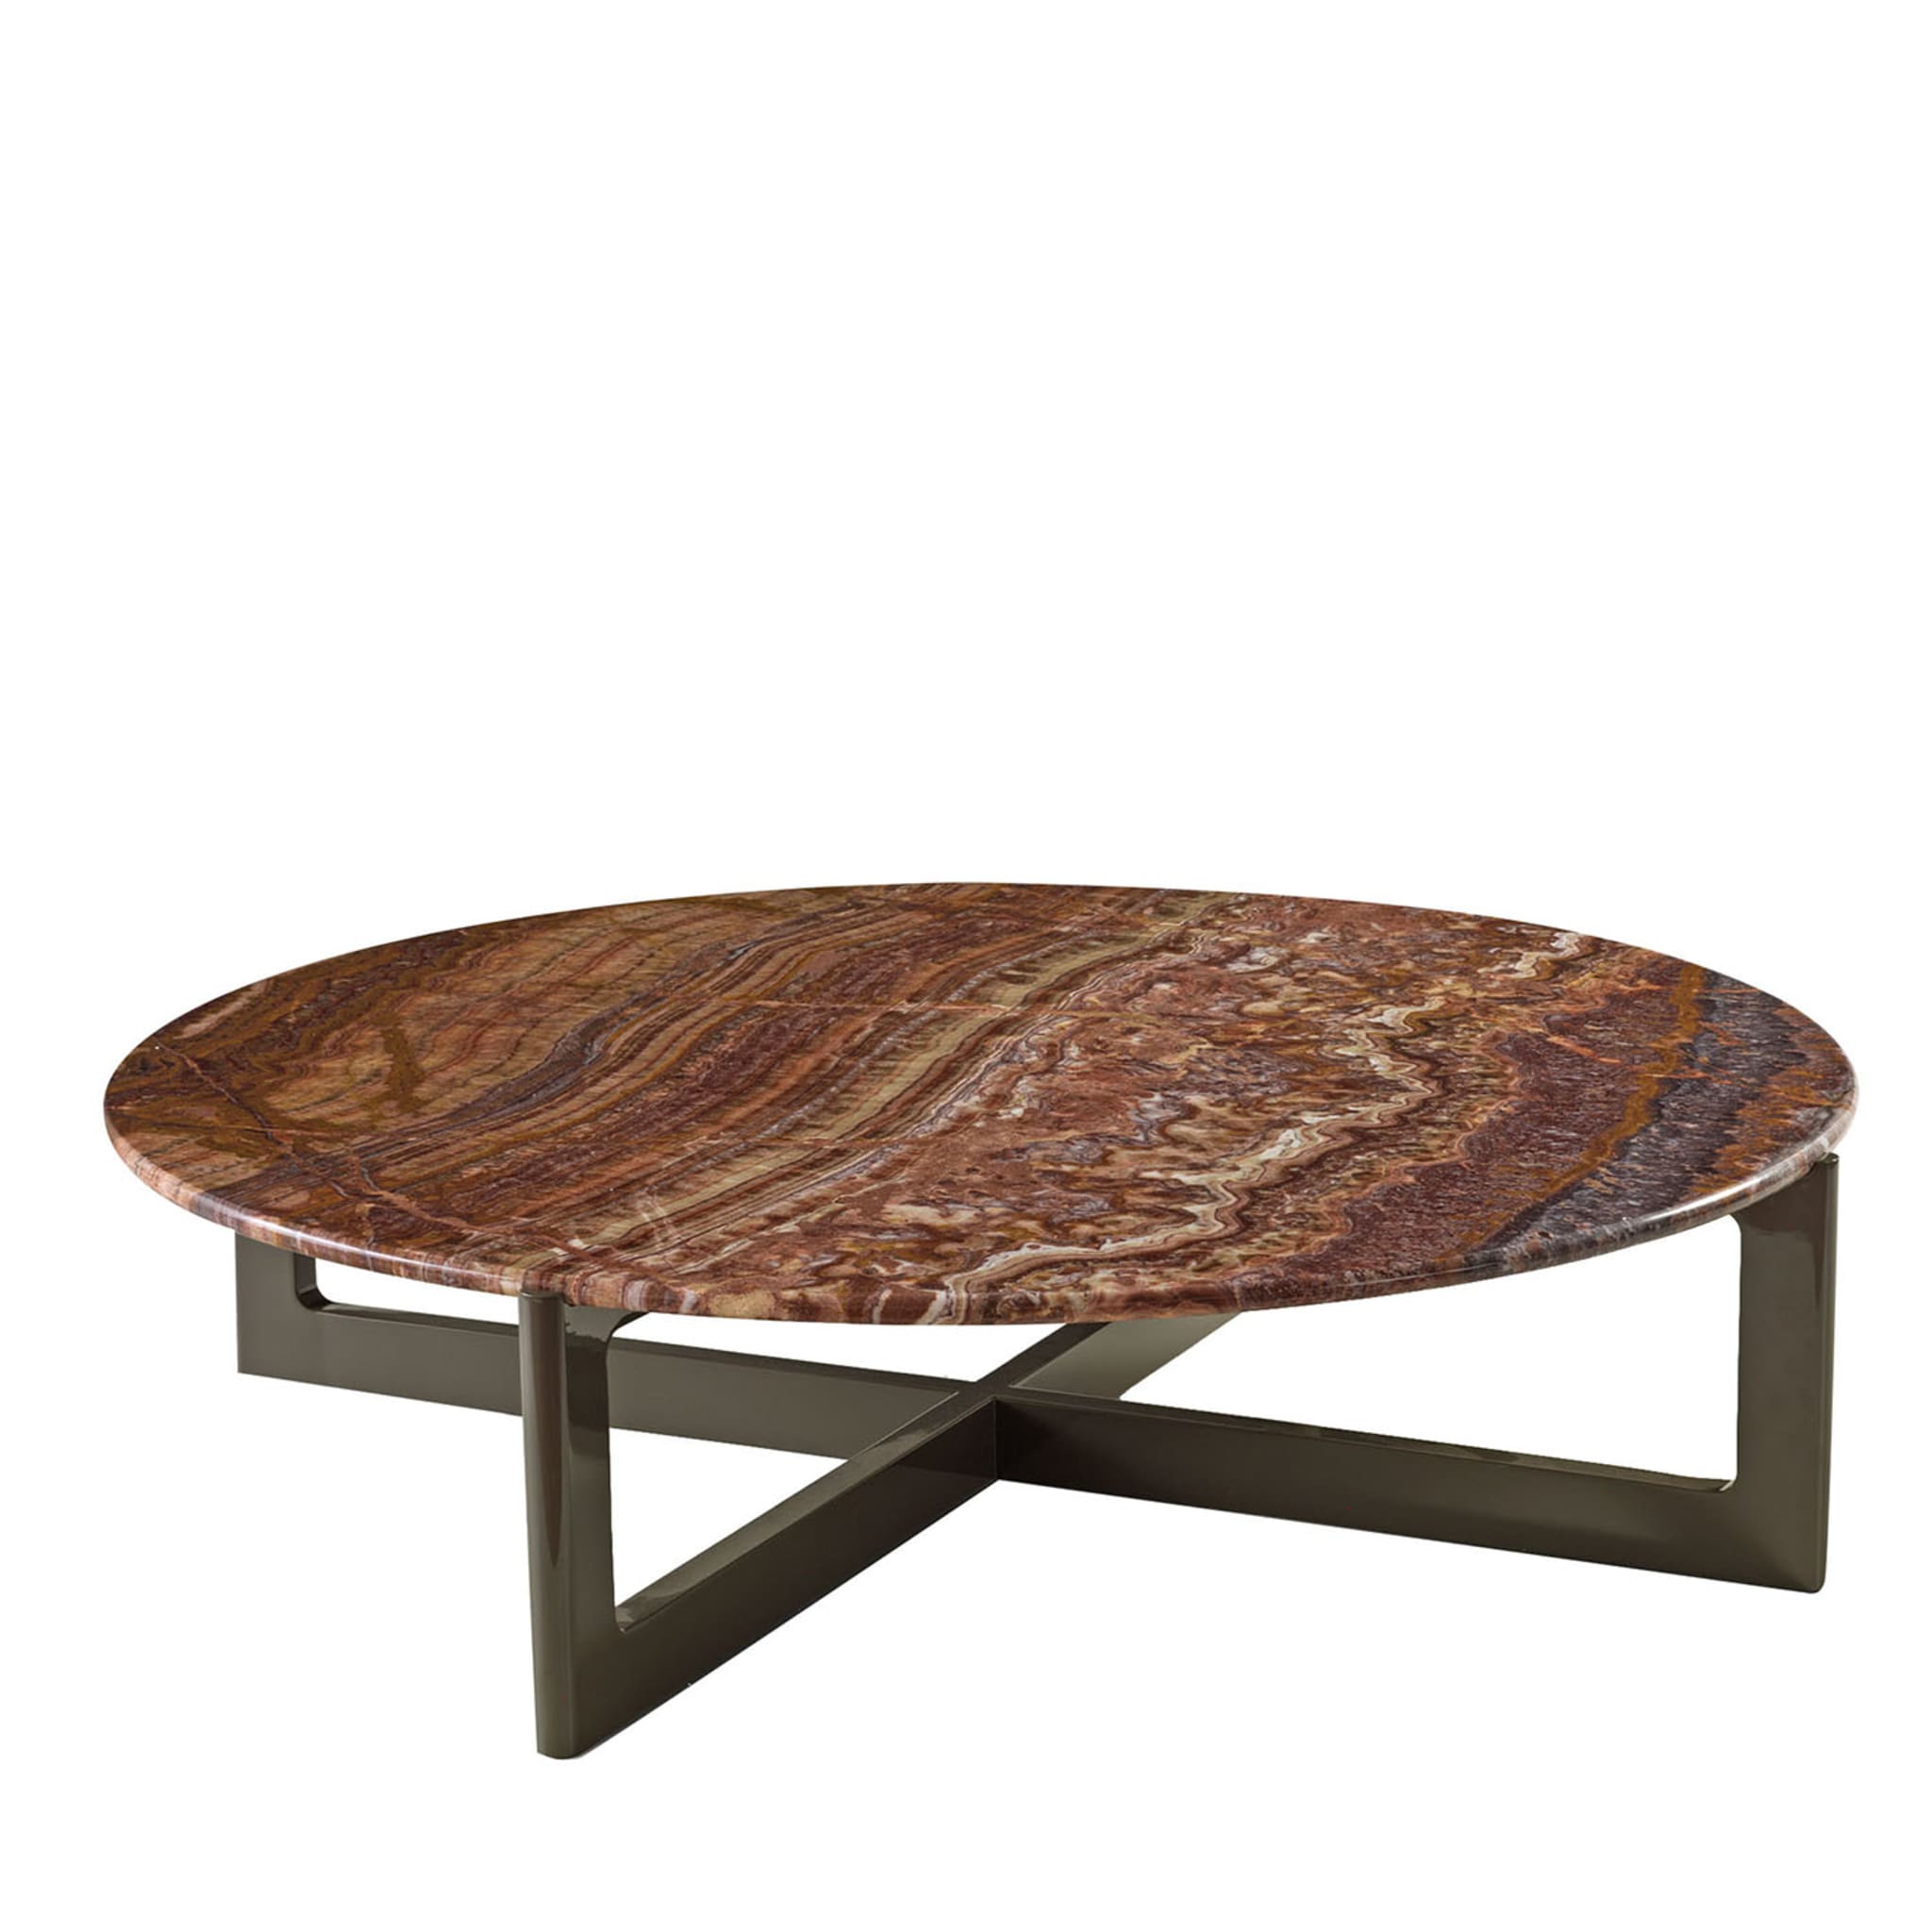 Ronin Coffee Table with Marble Top - Main view